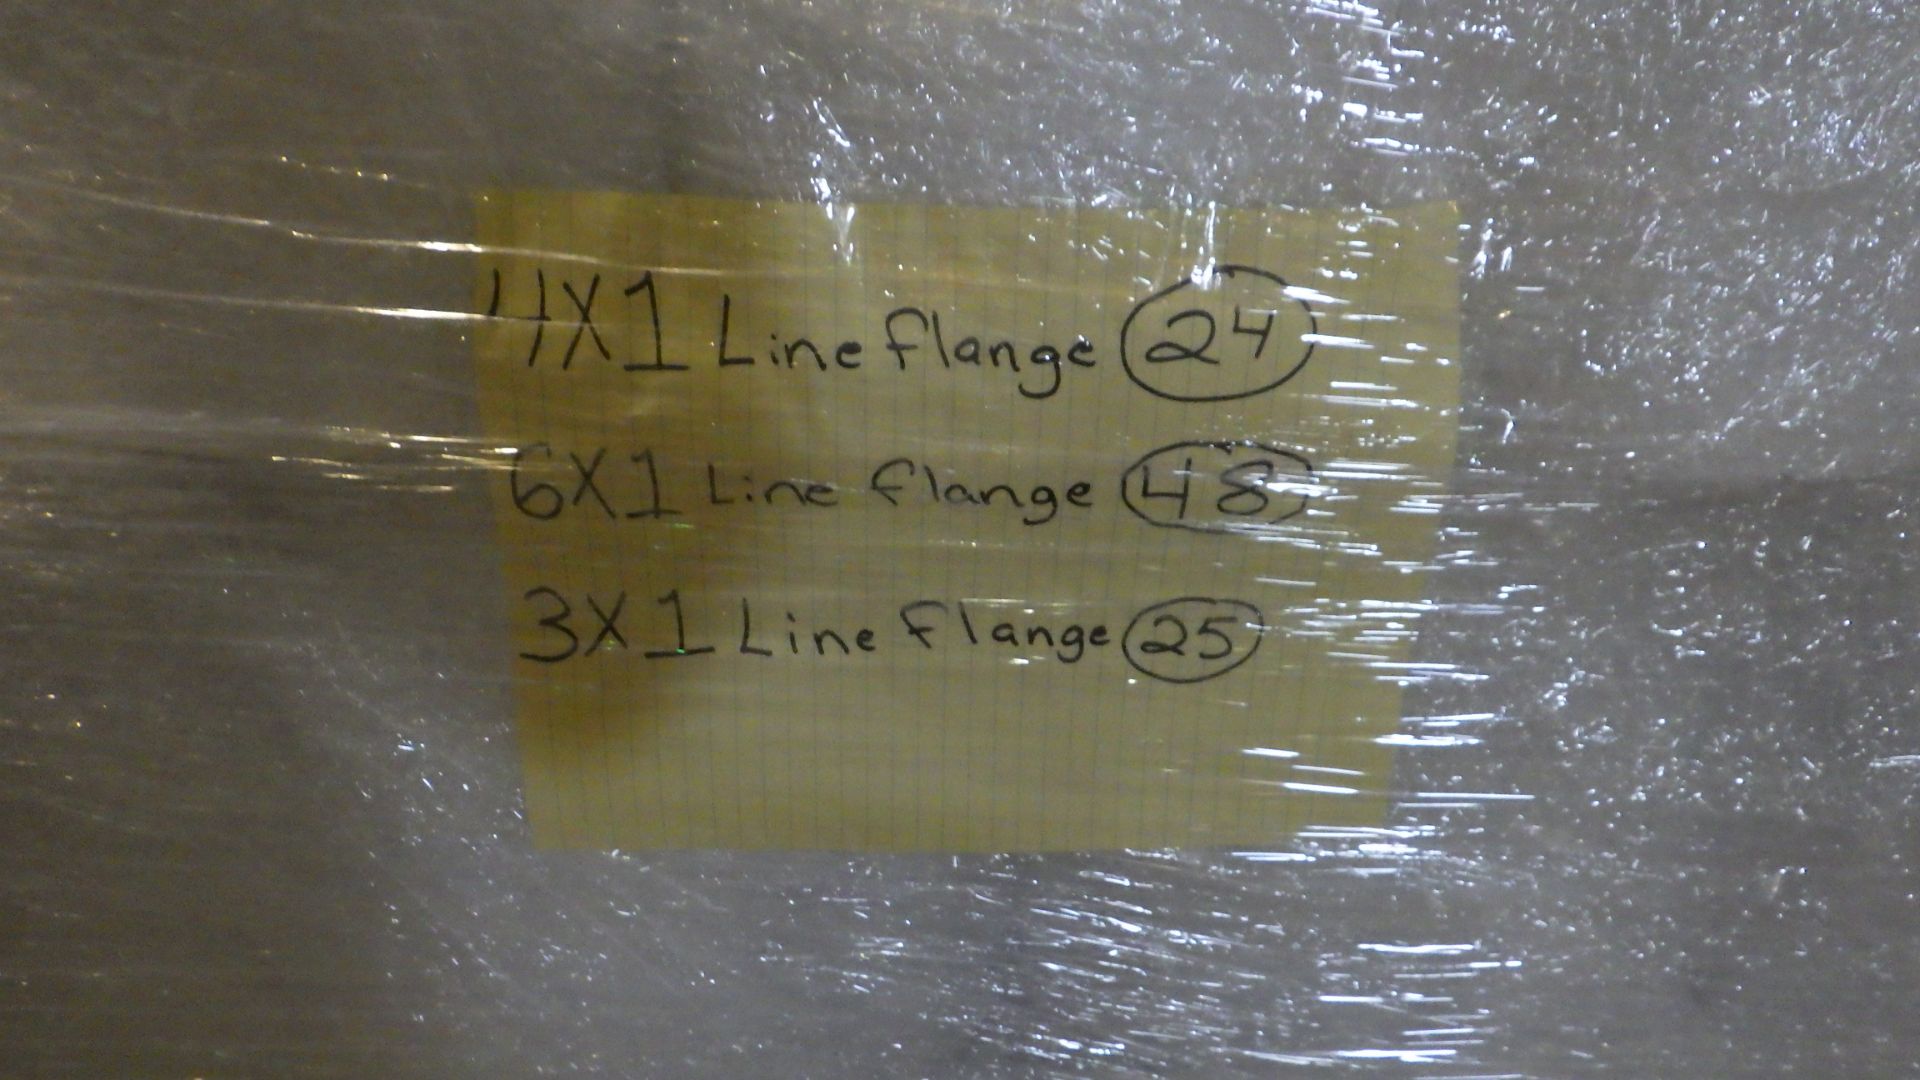 4, 6, AND 3 X1 LINE FLANGE PIPE INSULATION 98 PCS